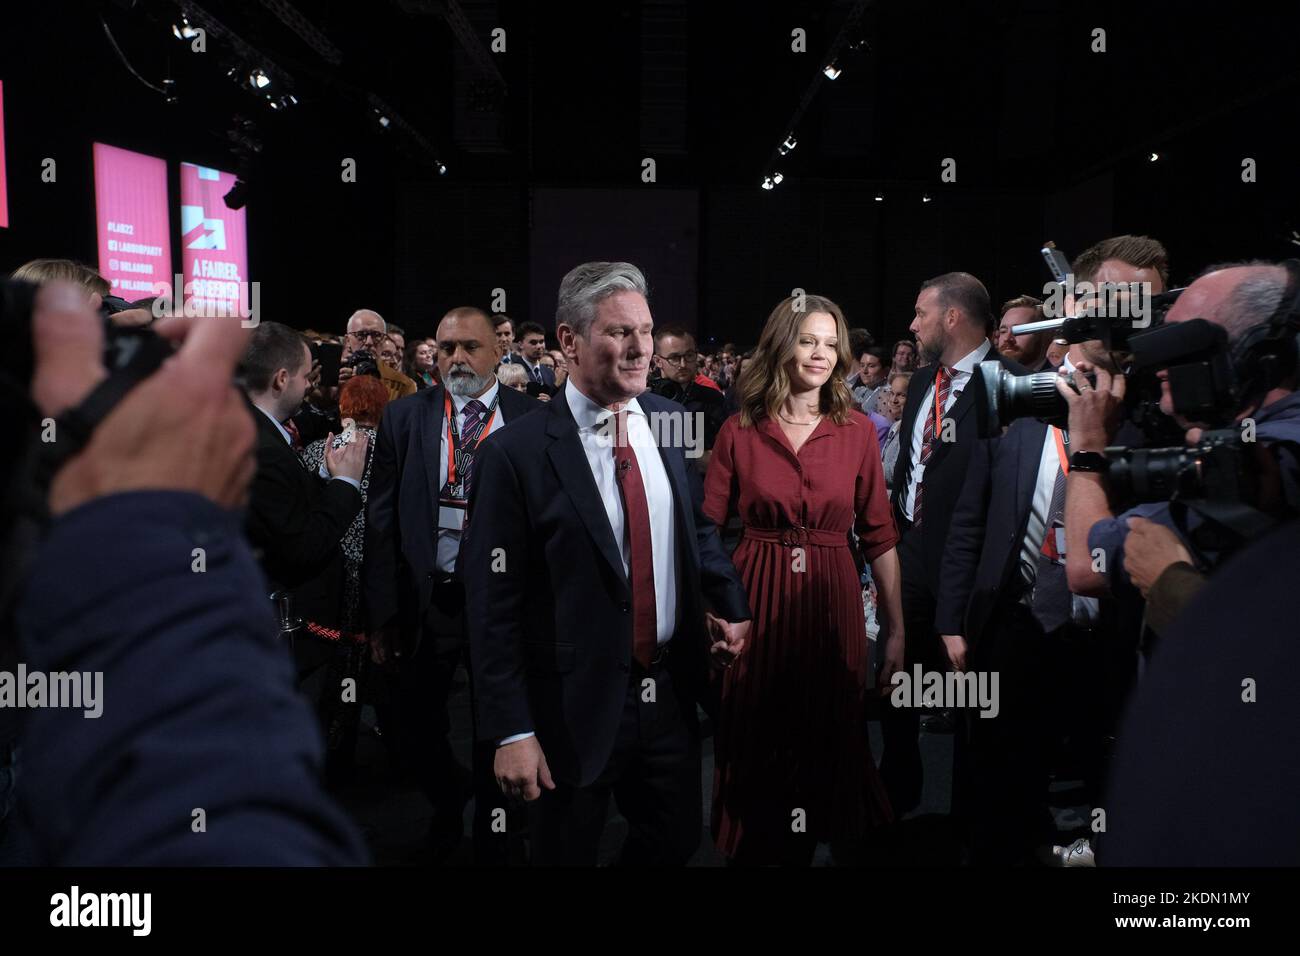 Keir Starmer, Leader of the Opposition, with his wife, Victoria, exits the conference hall following his keynote speech on day 3. photographed during the Labour Party Autumn Conference held at Acc Liverpool , Liverpool on Tuesday 27 September 2022 . Picture by Julie Edwards. Stock Photo